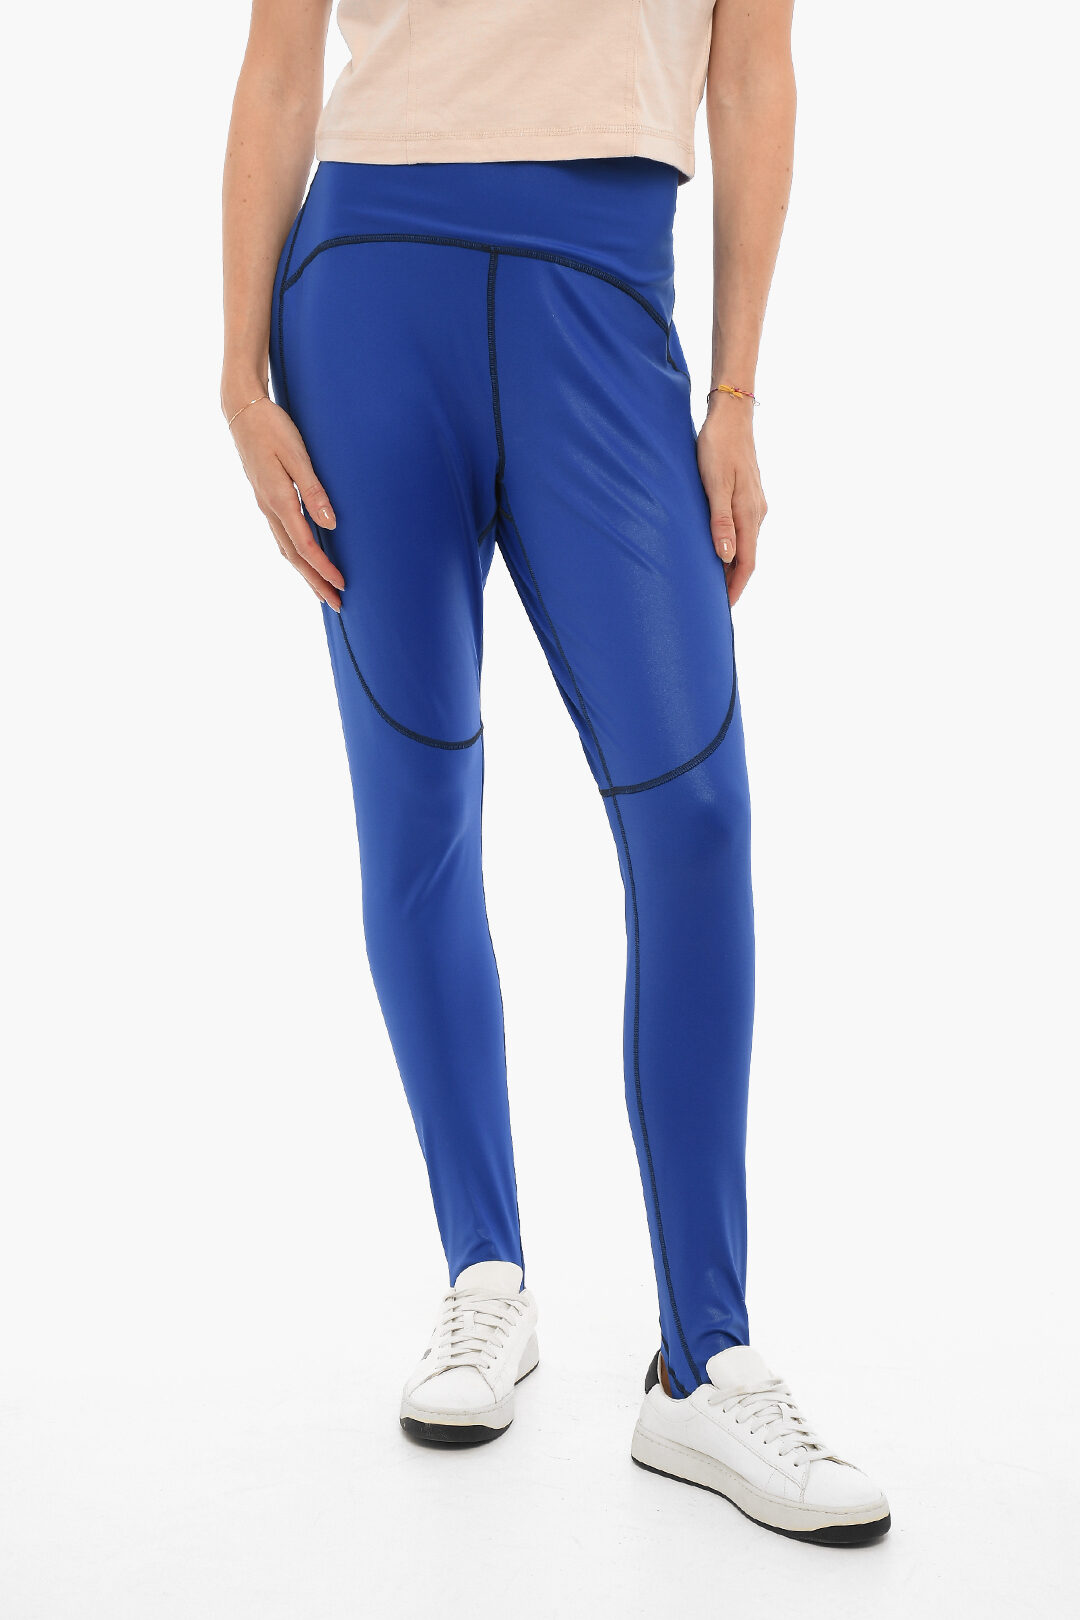 https://data.glamood.com/imgprodotto/stella-mccartney-stretch-fabric-leggings-with-visible-stitching-and-heel-cut-out-detail_1379067_zoom.jpg